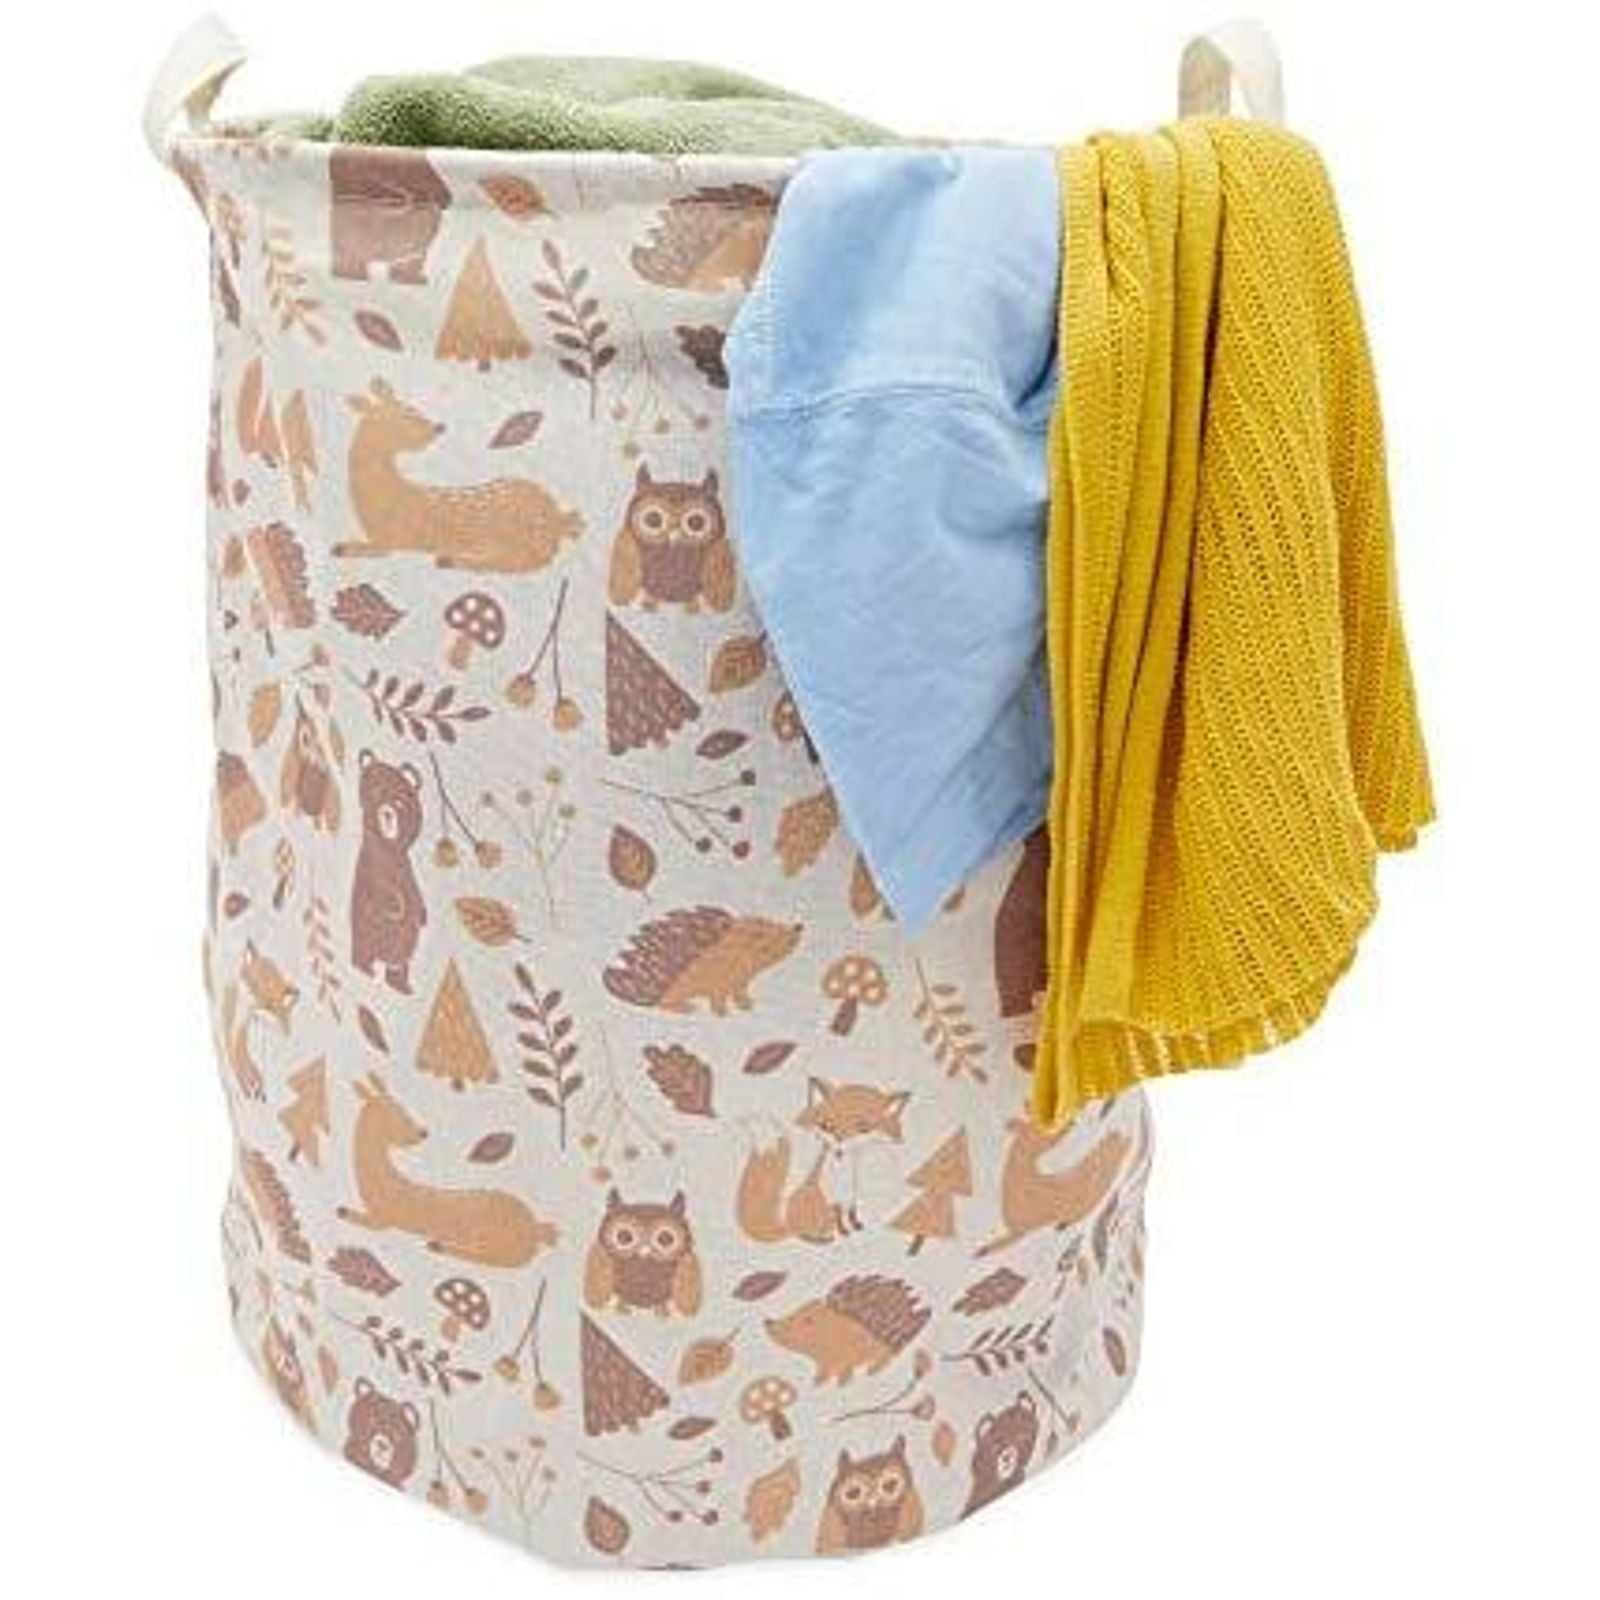 Butterfly Cute Laundry Basket Canvas Fabric Collapsible Organizer For Laundry Hamper Toy Bins Gift Baskets Bedroom Clothes Baby Nursery